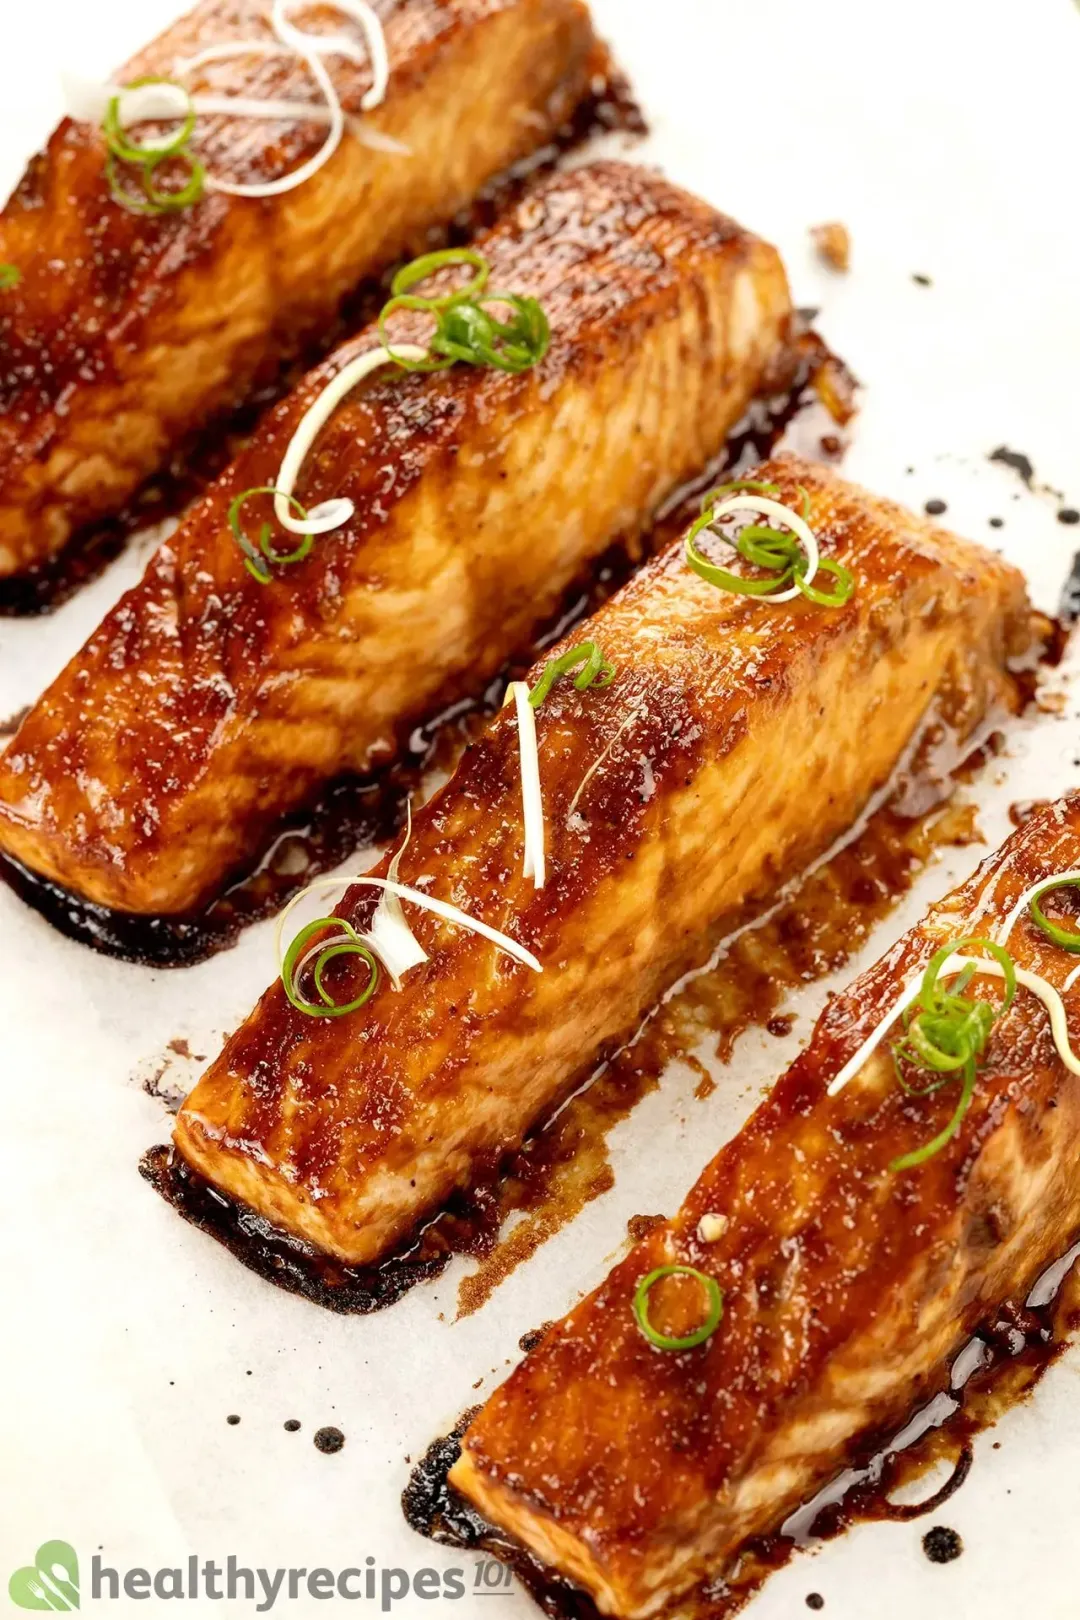 Four pieces of salmon fillets covered in a glossy brown miso sauce